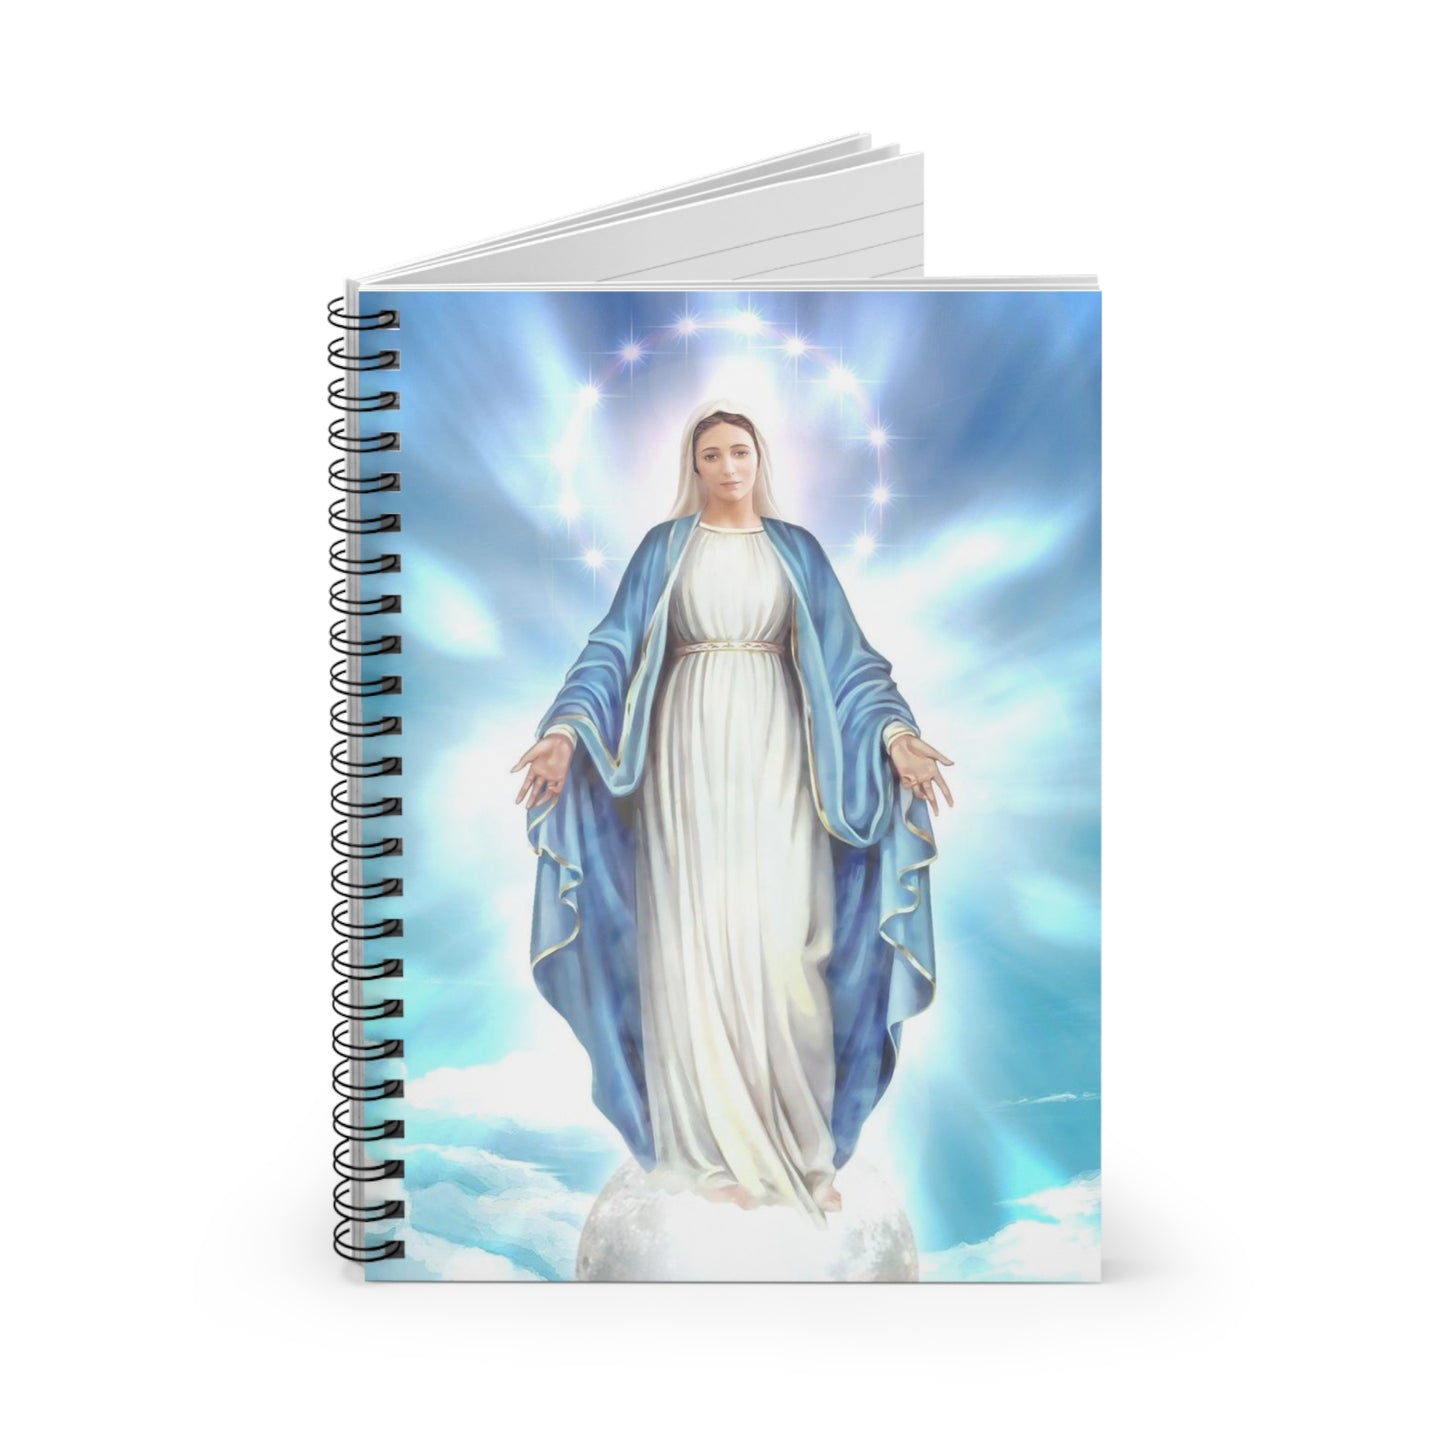 Our Lady of the Immaculte Conception Catholic Prayer Journal, religious journal, Catholic notebook, Adoration diary, Catholic diary